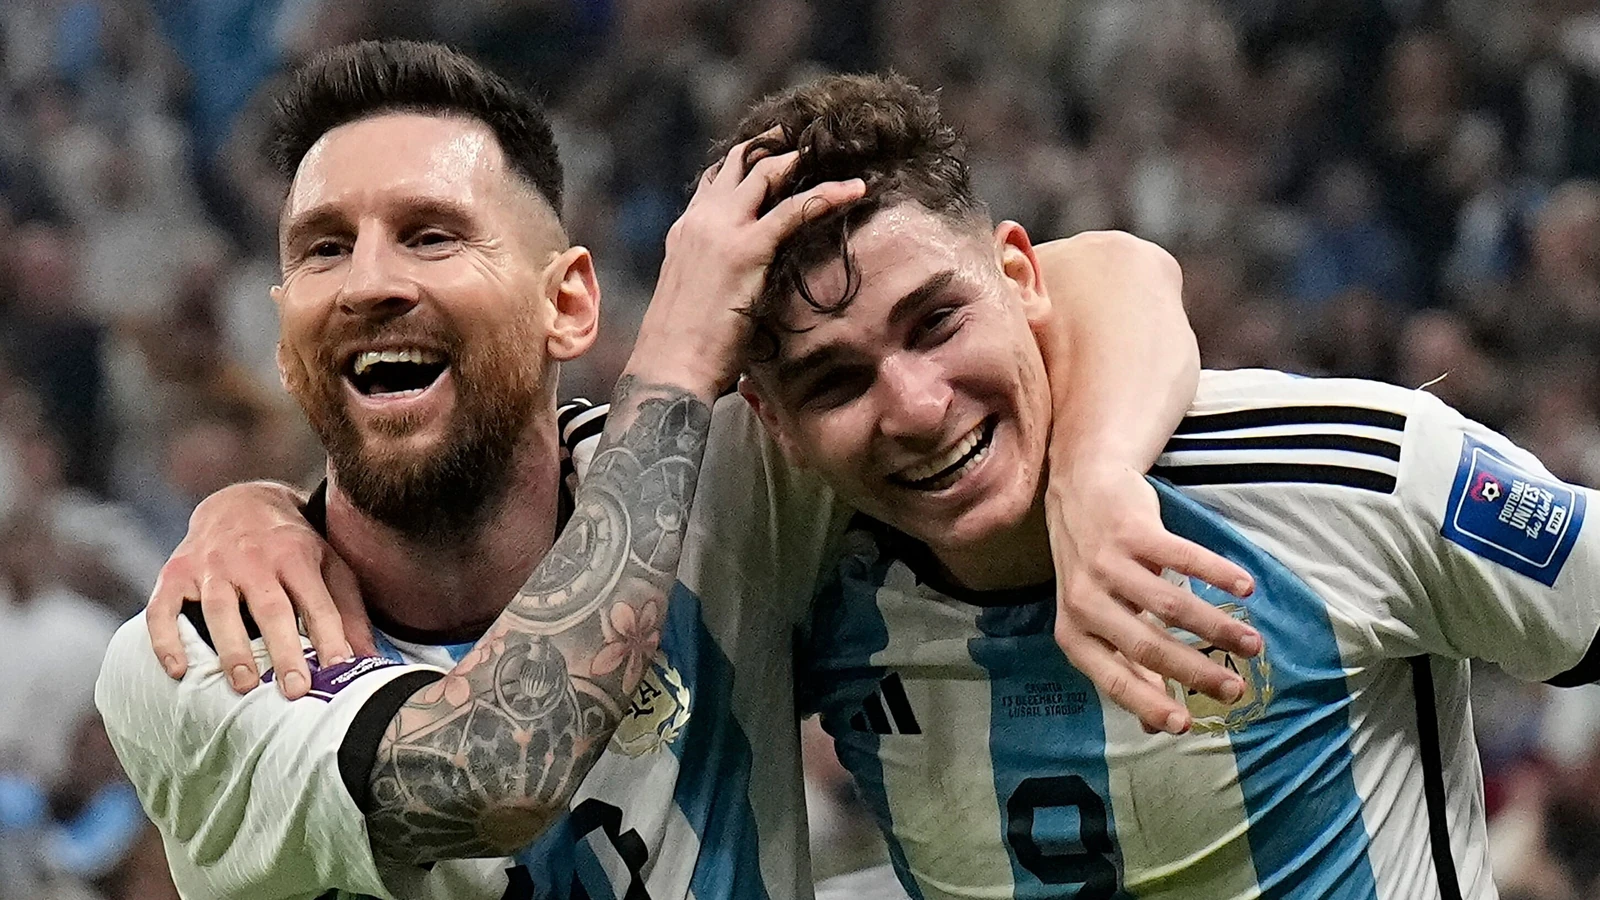 Lionel Messi and Julian Alvarez stunned Croatia in their World Cup semi-final clash as Argentina secured a 3-0 victory and a spot in the final.